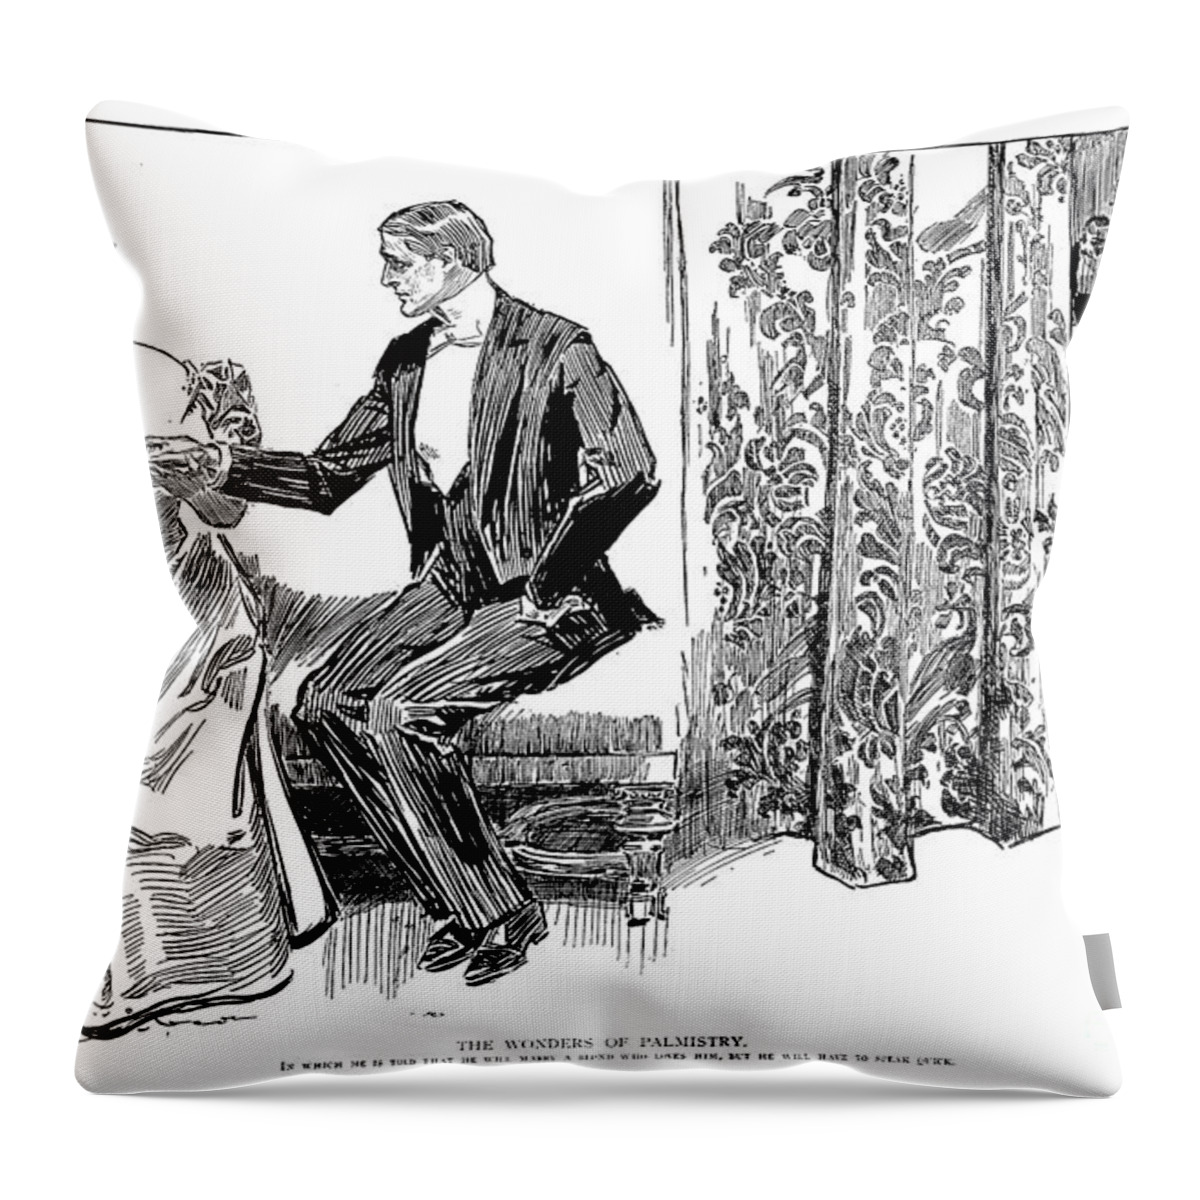 1897 Throw Pillow featuring the photograph Palmistry, 1897 by Charles Dana Gibson